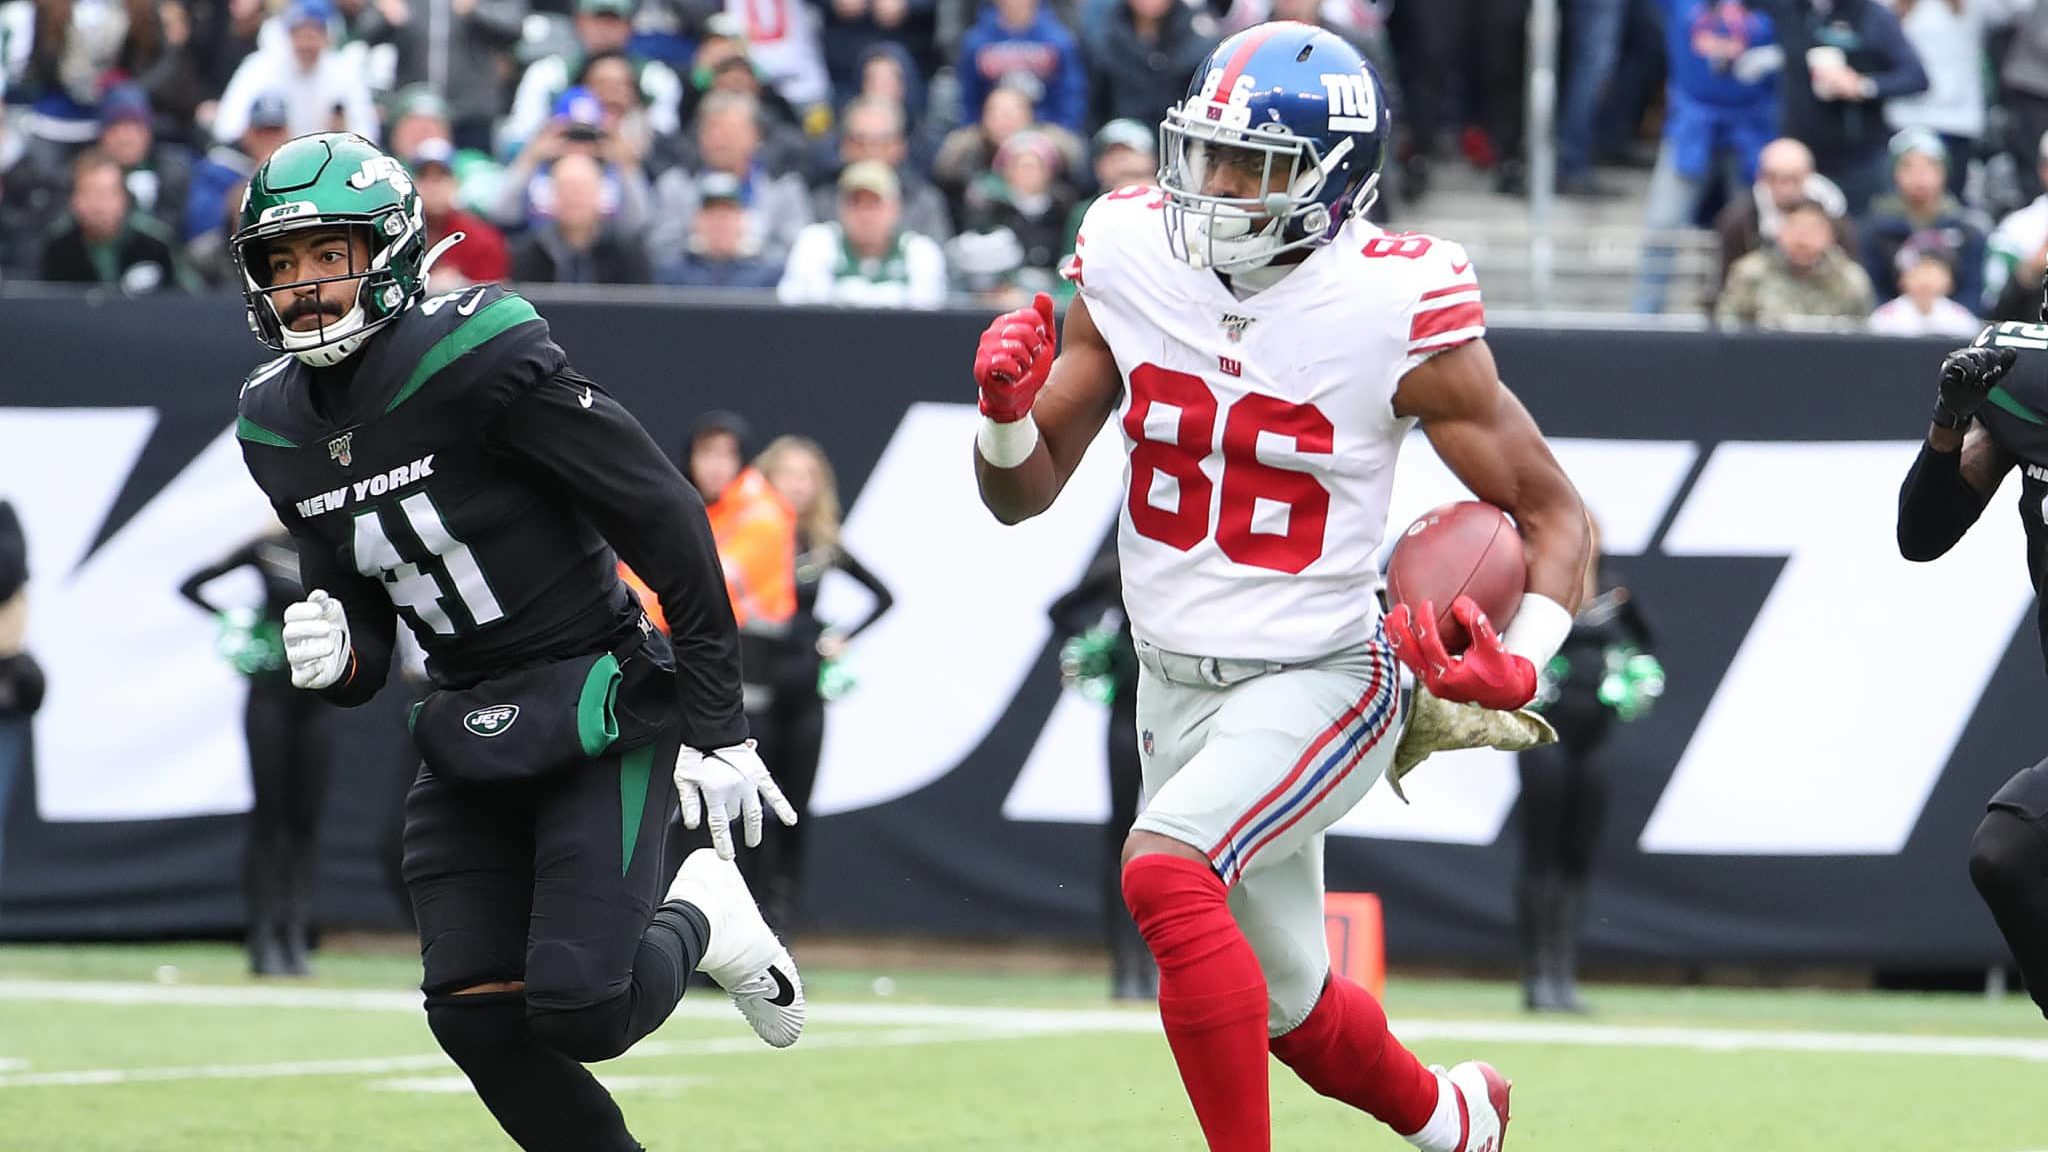 EAST RUTHERFORD, NEW JERSEY - NOVEMBER 10: Darius Slayton #86 of the New York Giants scores his second touchdown in the second quarter against Matthias Farley #41 of the New York Jets during their game at MetLife Stadium on November 10, 2019 in East Rutherford, New Jersey.